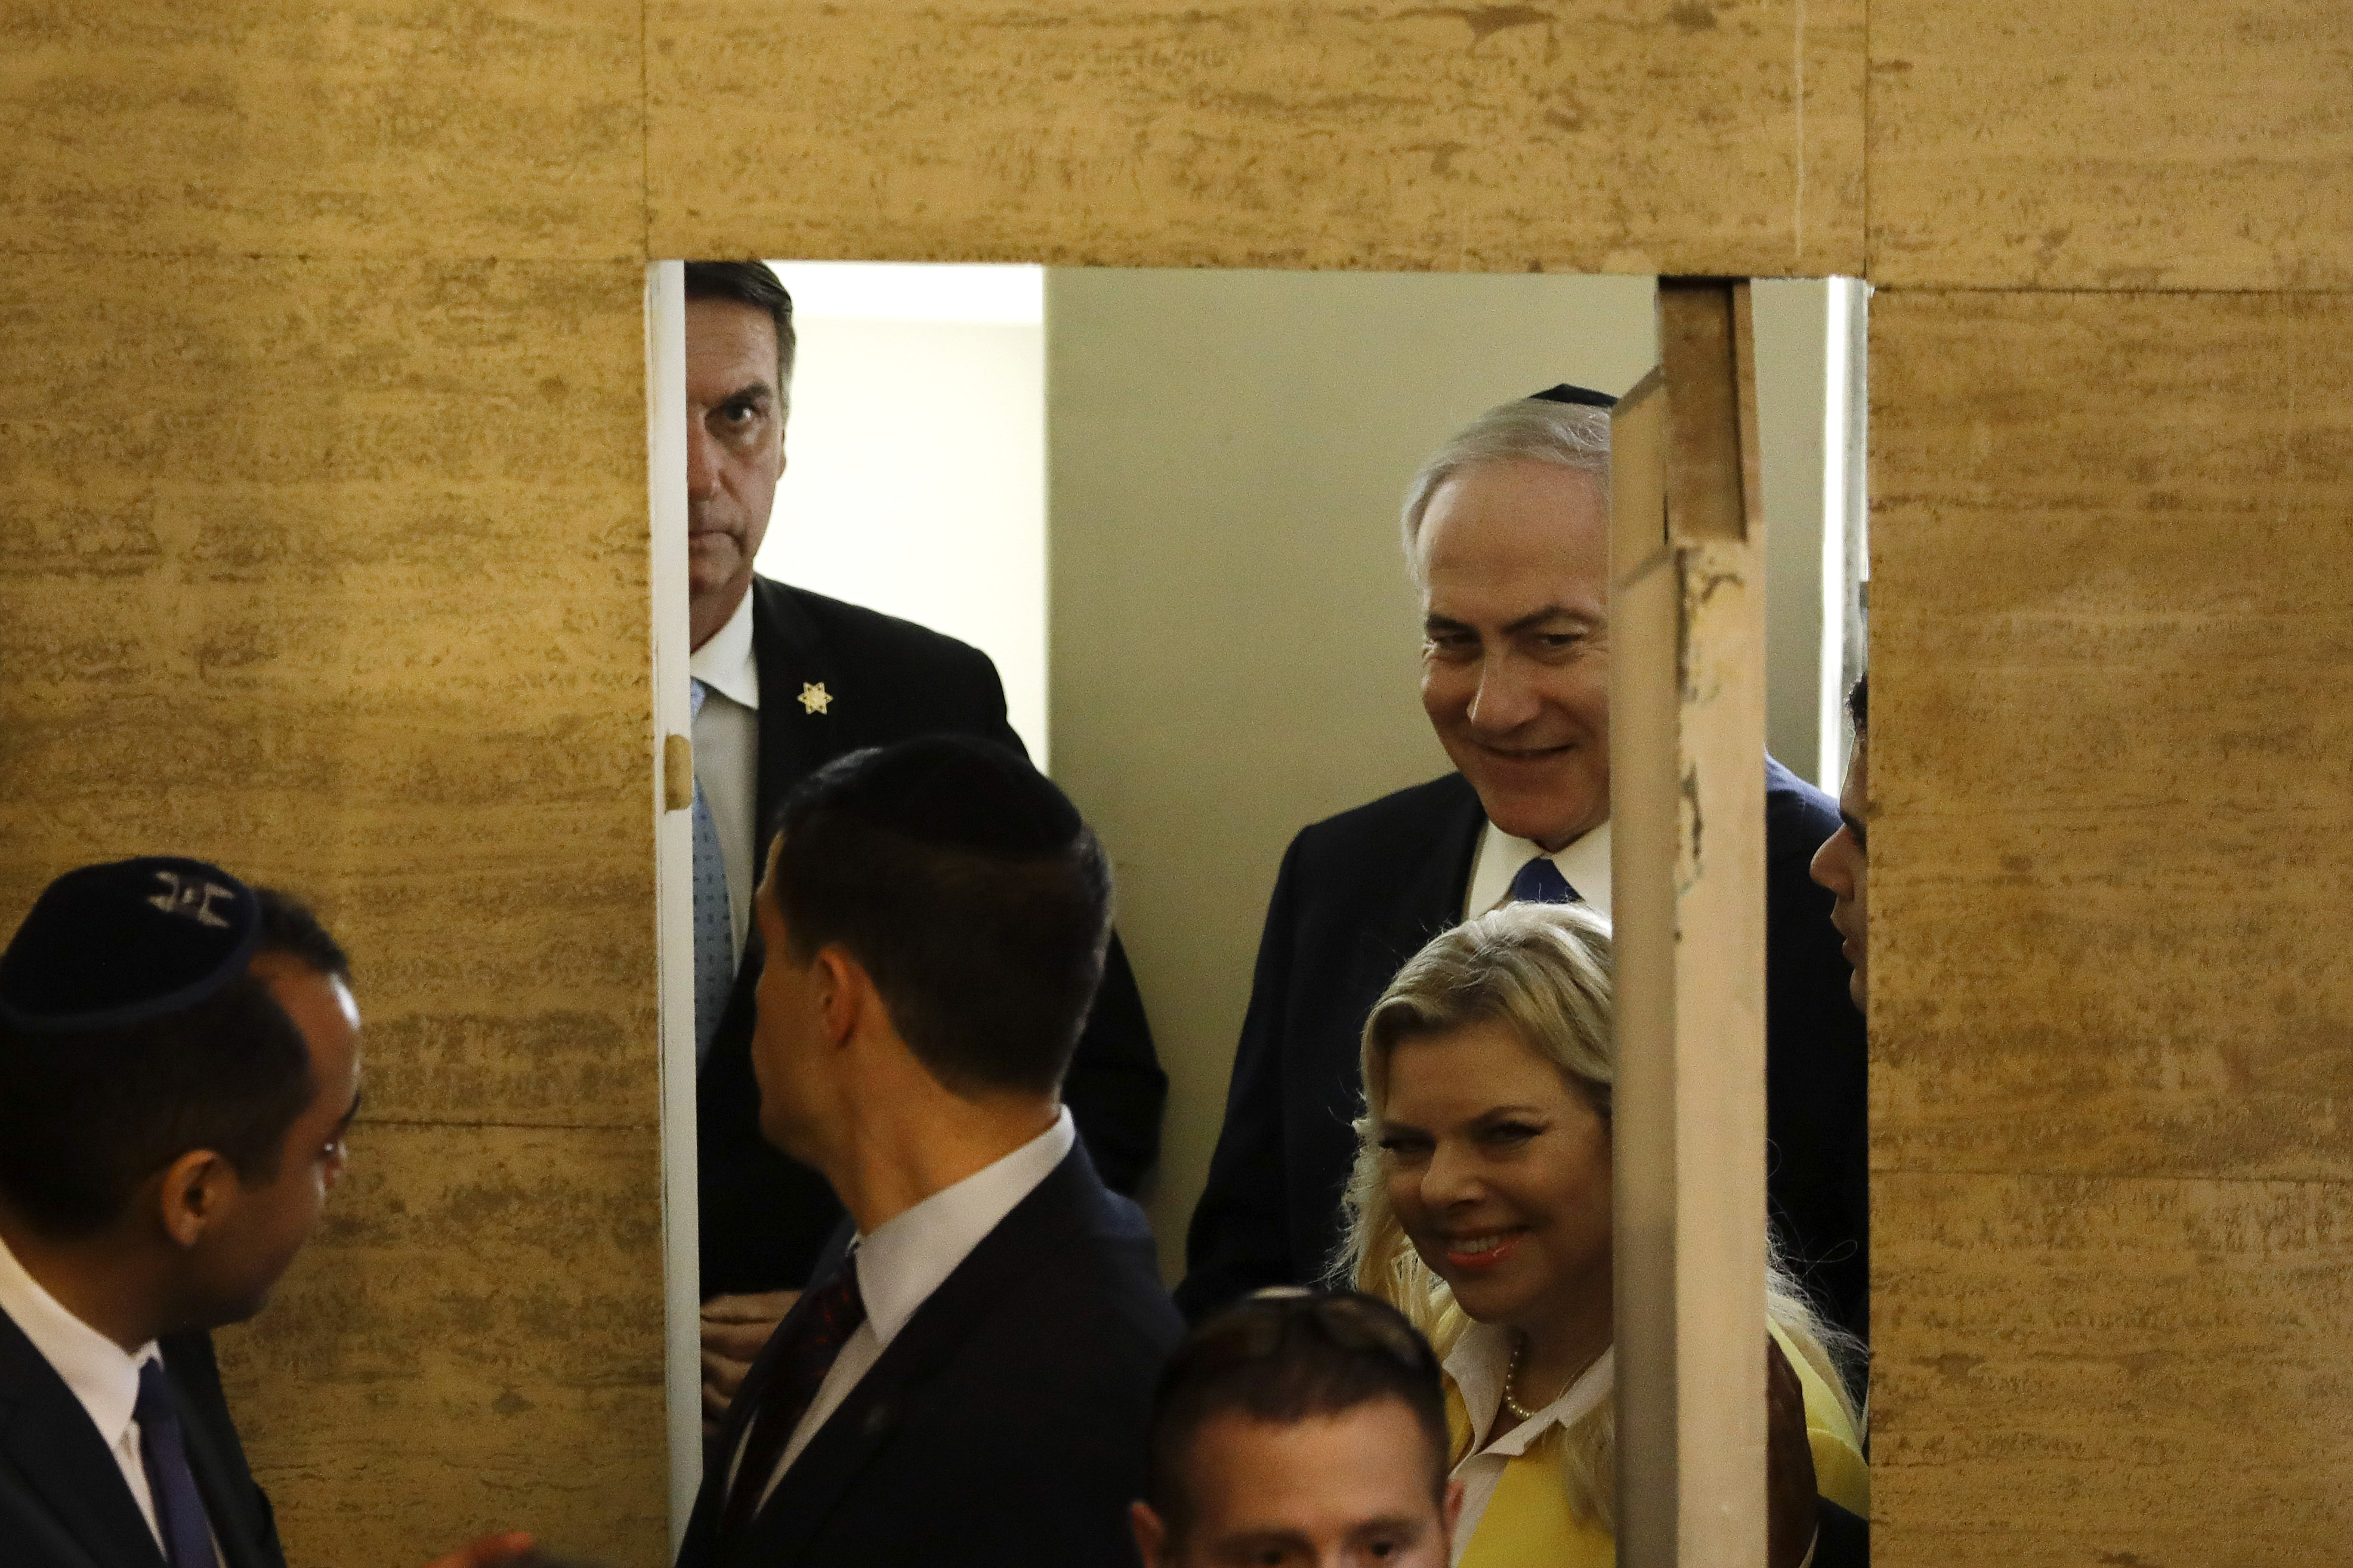 Brazil's President-elect Jair Bolsonaro, left back, arrives with Israel's Prime Minister Benjamin Netanyahu and his wife Sara, to the Kehilat Yaacov synagogue, in Rio de Janeiro, Brazil, Friday, Dec. 28, 2018. According to the Israeli Embassy, Netanyahu will stay in Rio until Tuesday, when he will travel to Brasilia for the presidential inauguration. (Leo Correa/Pool Photo via AP)